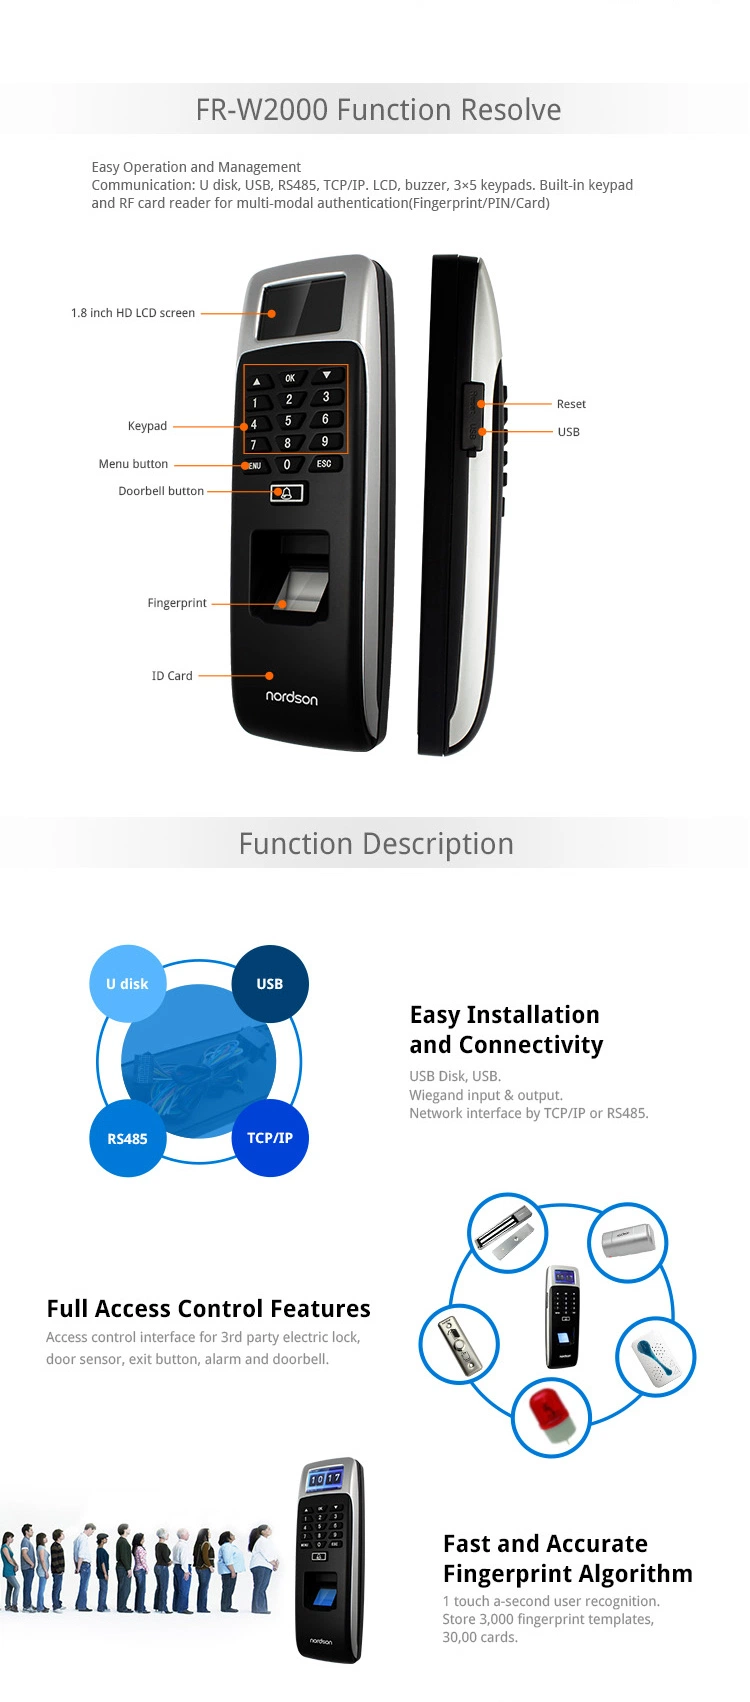 17 Languages Waterproof IP65 ID Card Biometric Network Fingerprint Device with Access Control